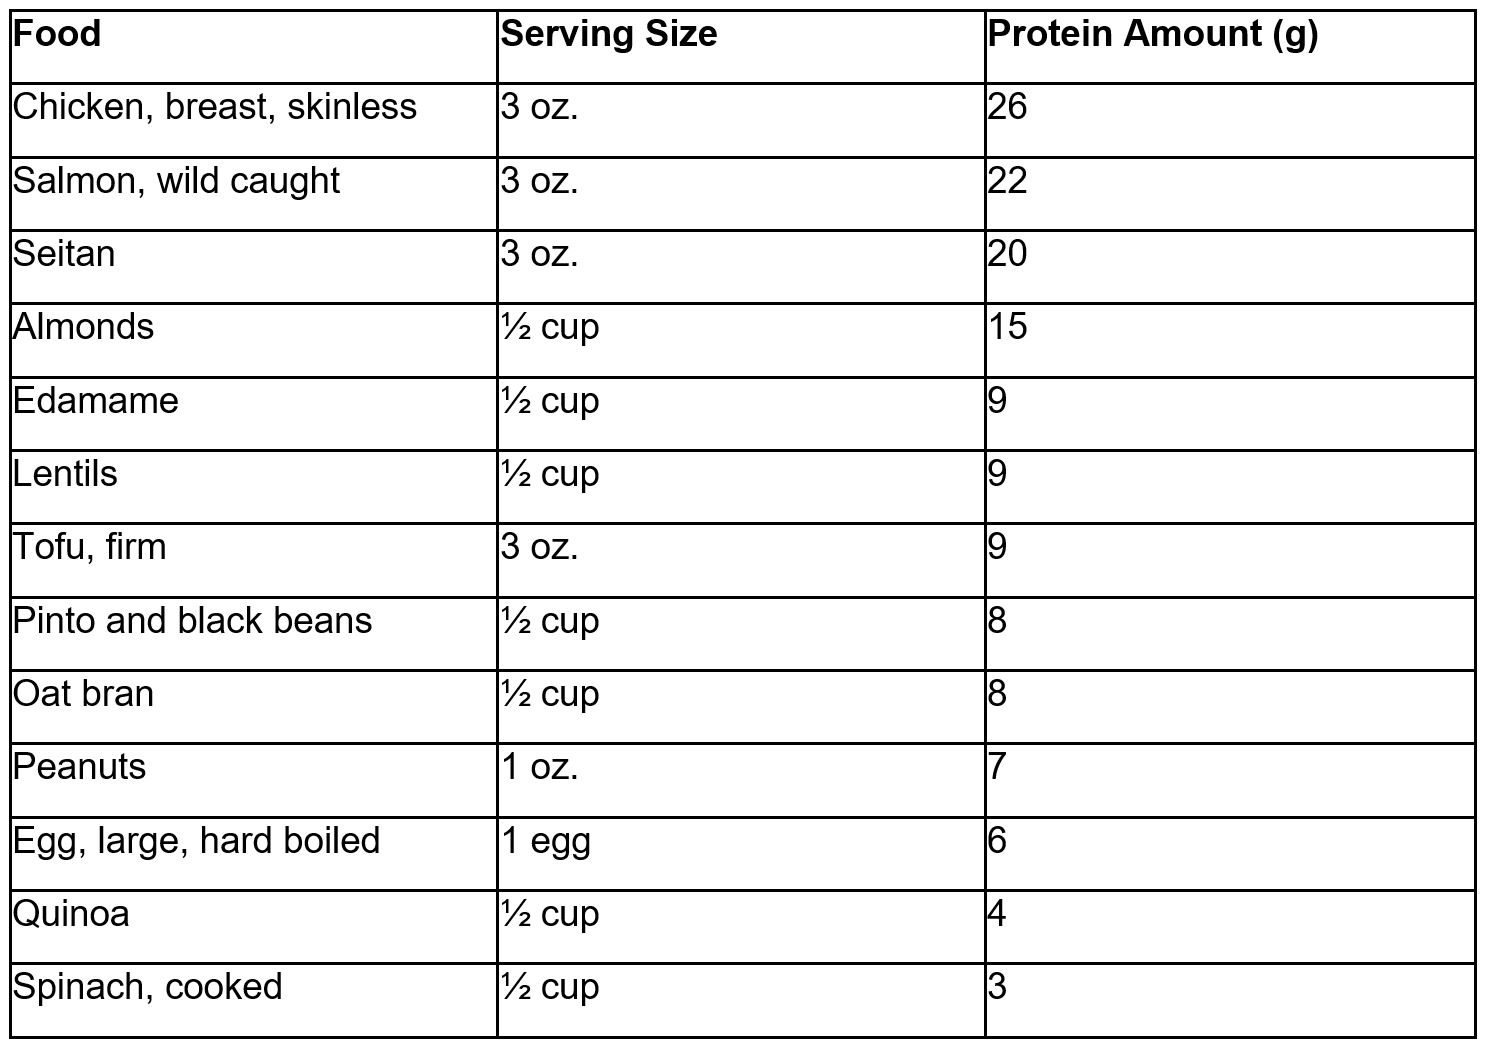 Protein amount table